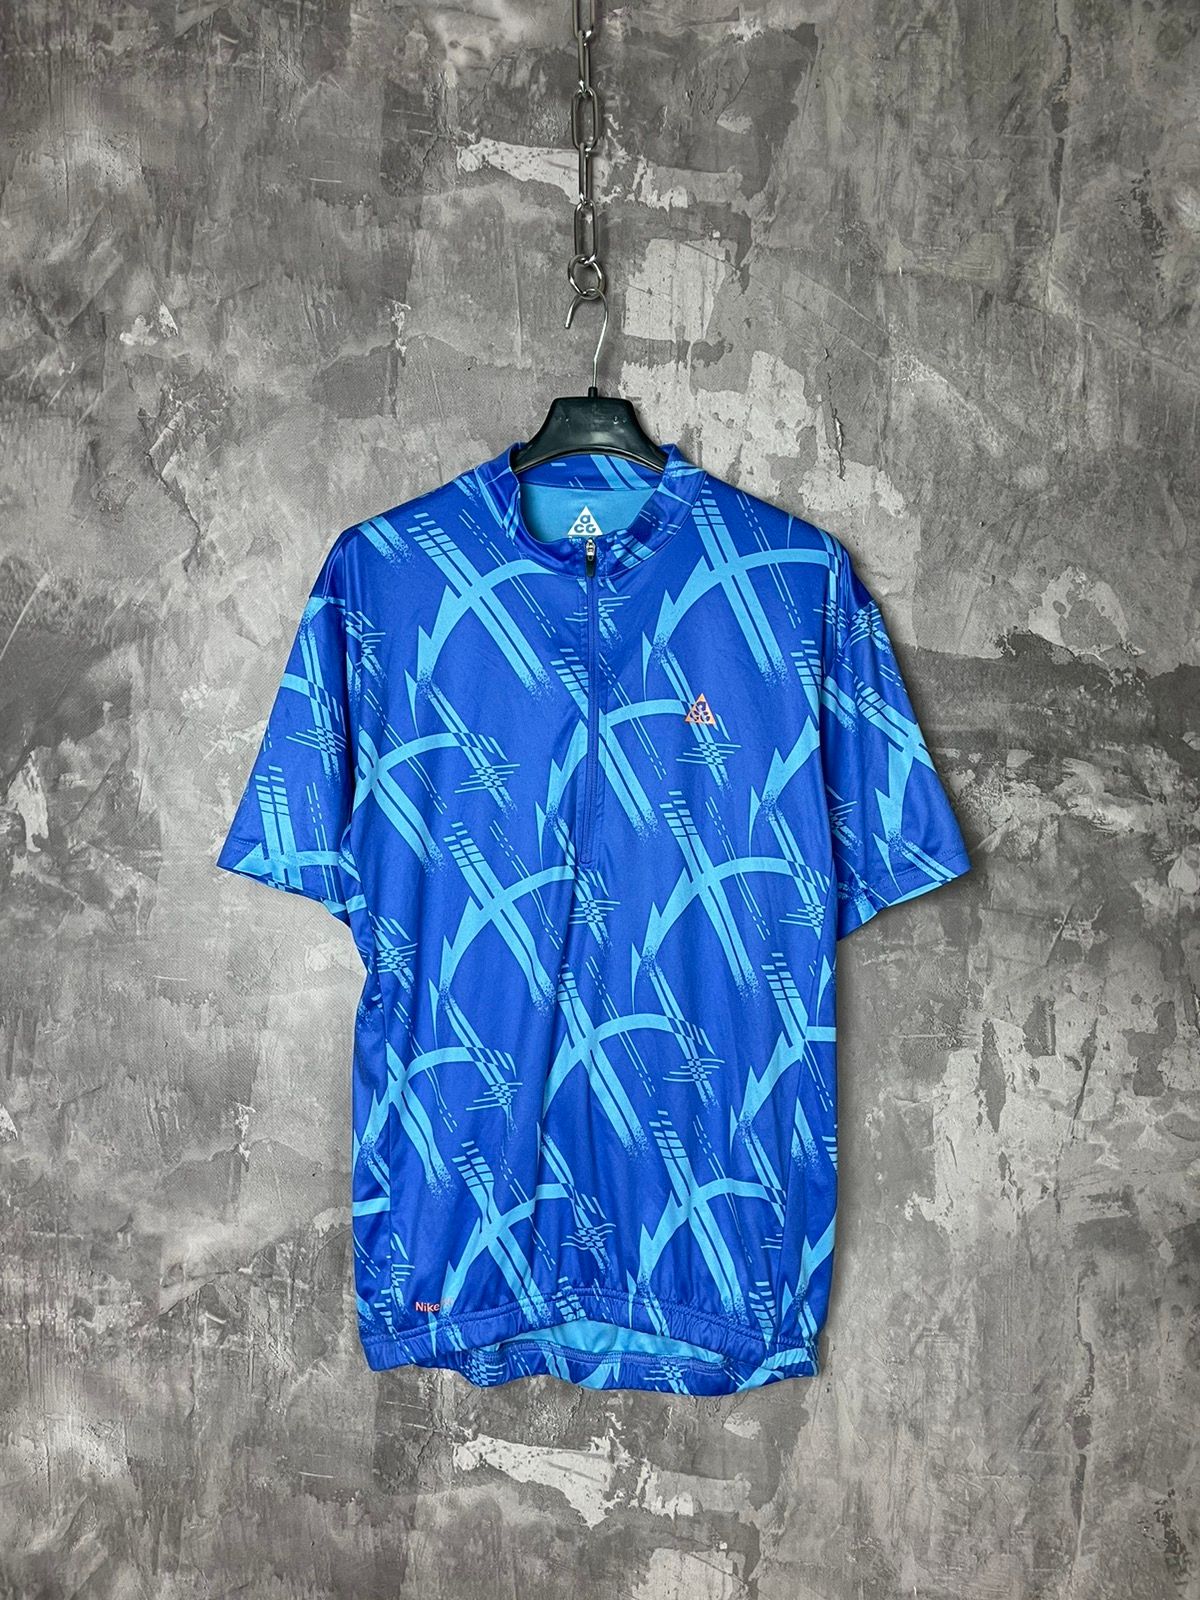 Outdoor Life Vintage 90s Nike ACG Cycling Jersey Bike Shirt Made